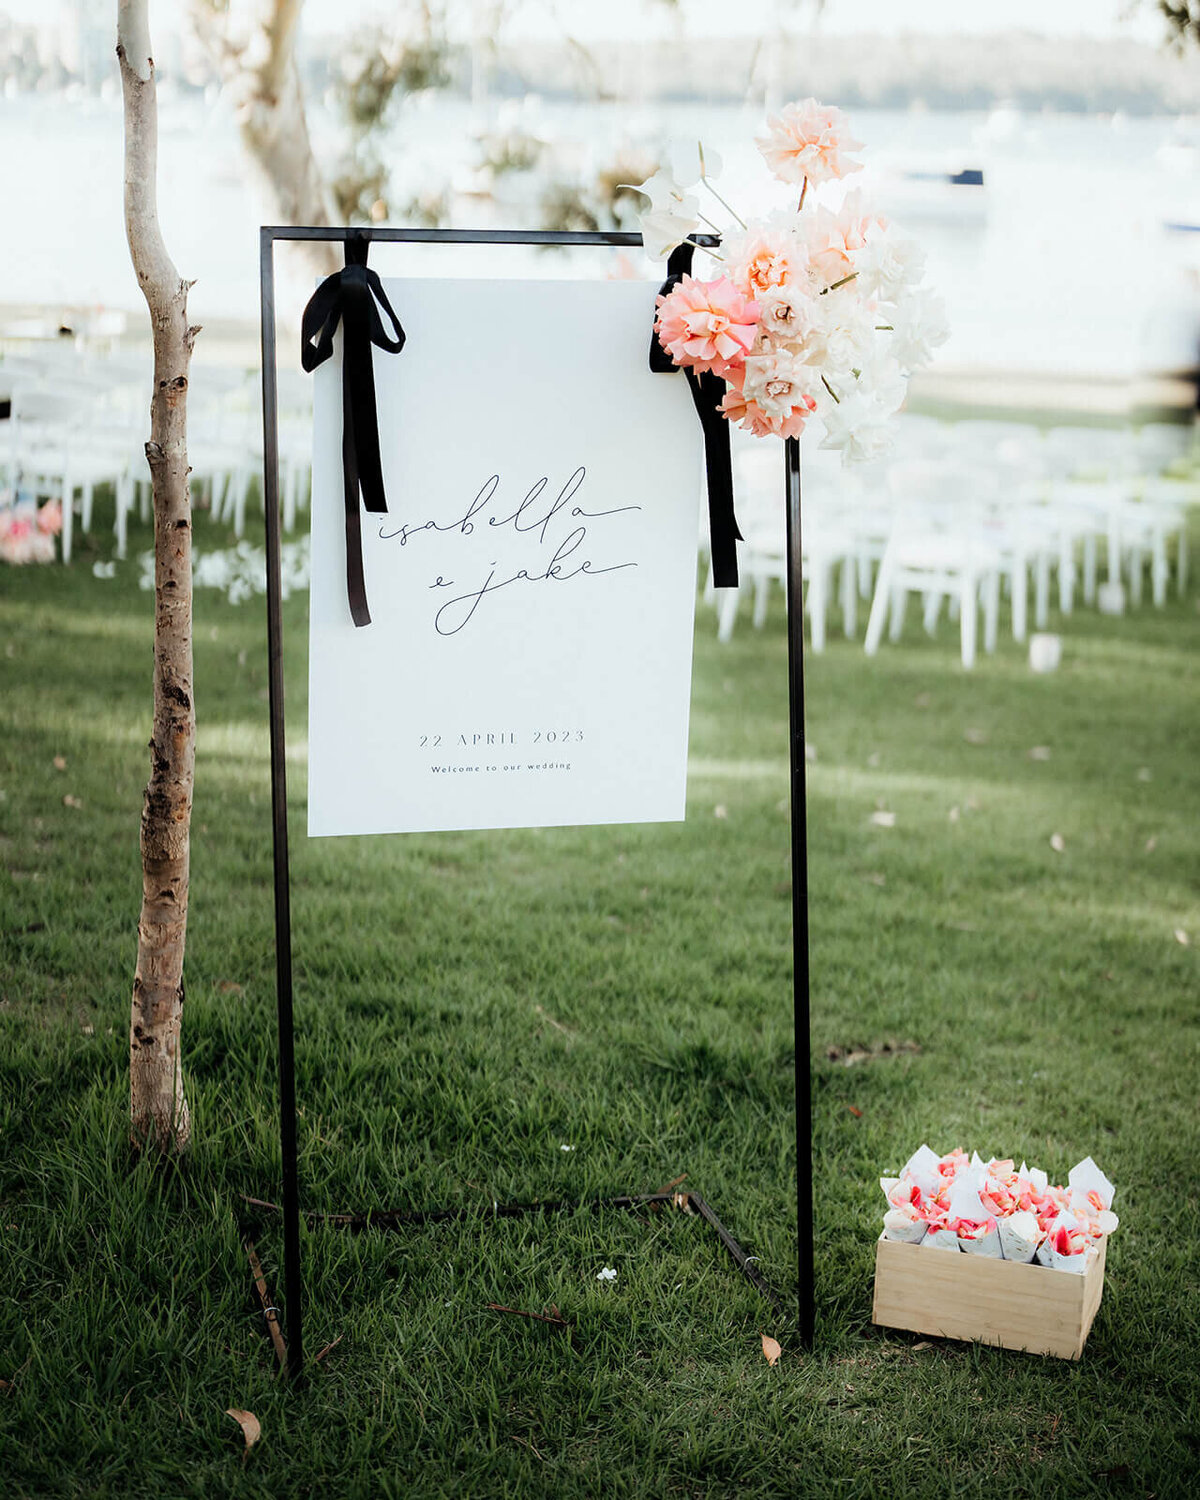 Ceremony Welcome sign